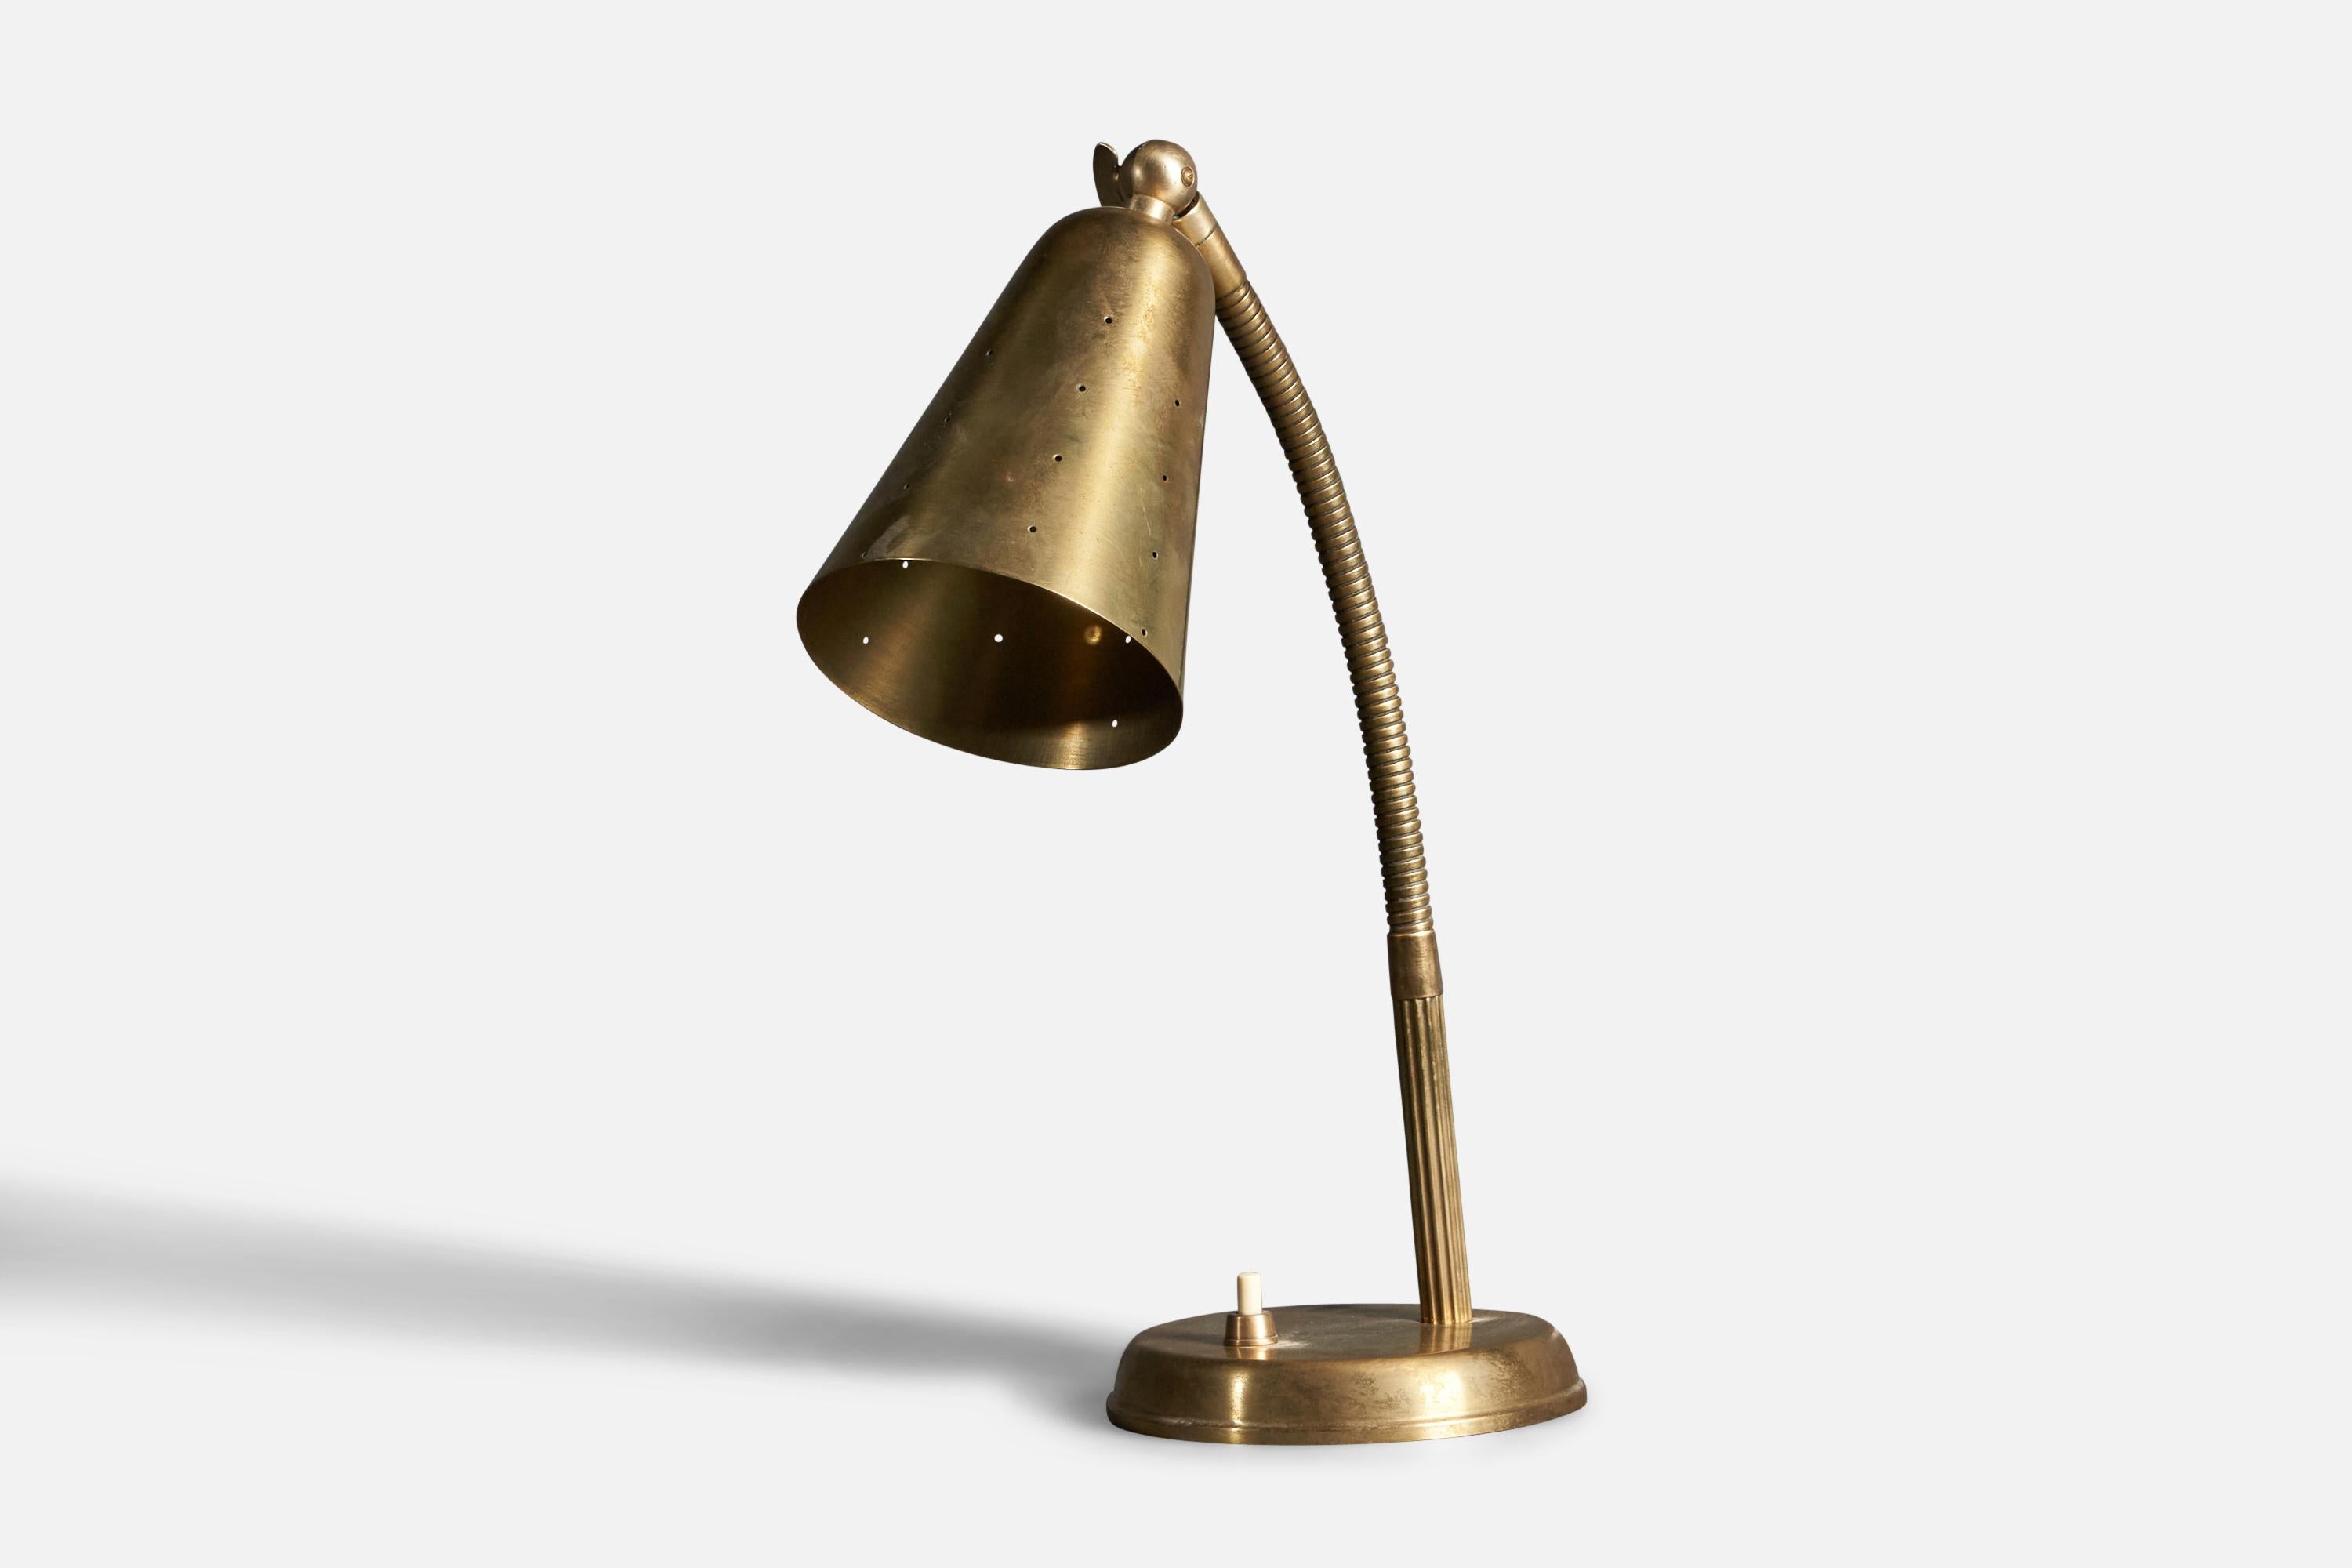 Danish Designer, Adjustable Modernist Table Lamp, Brass, Denmark, 1940s In Good Condition For Sale In High Point, NC